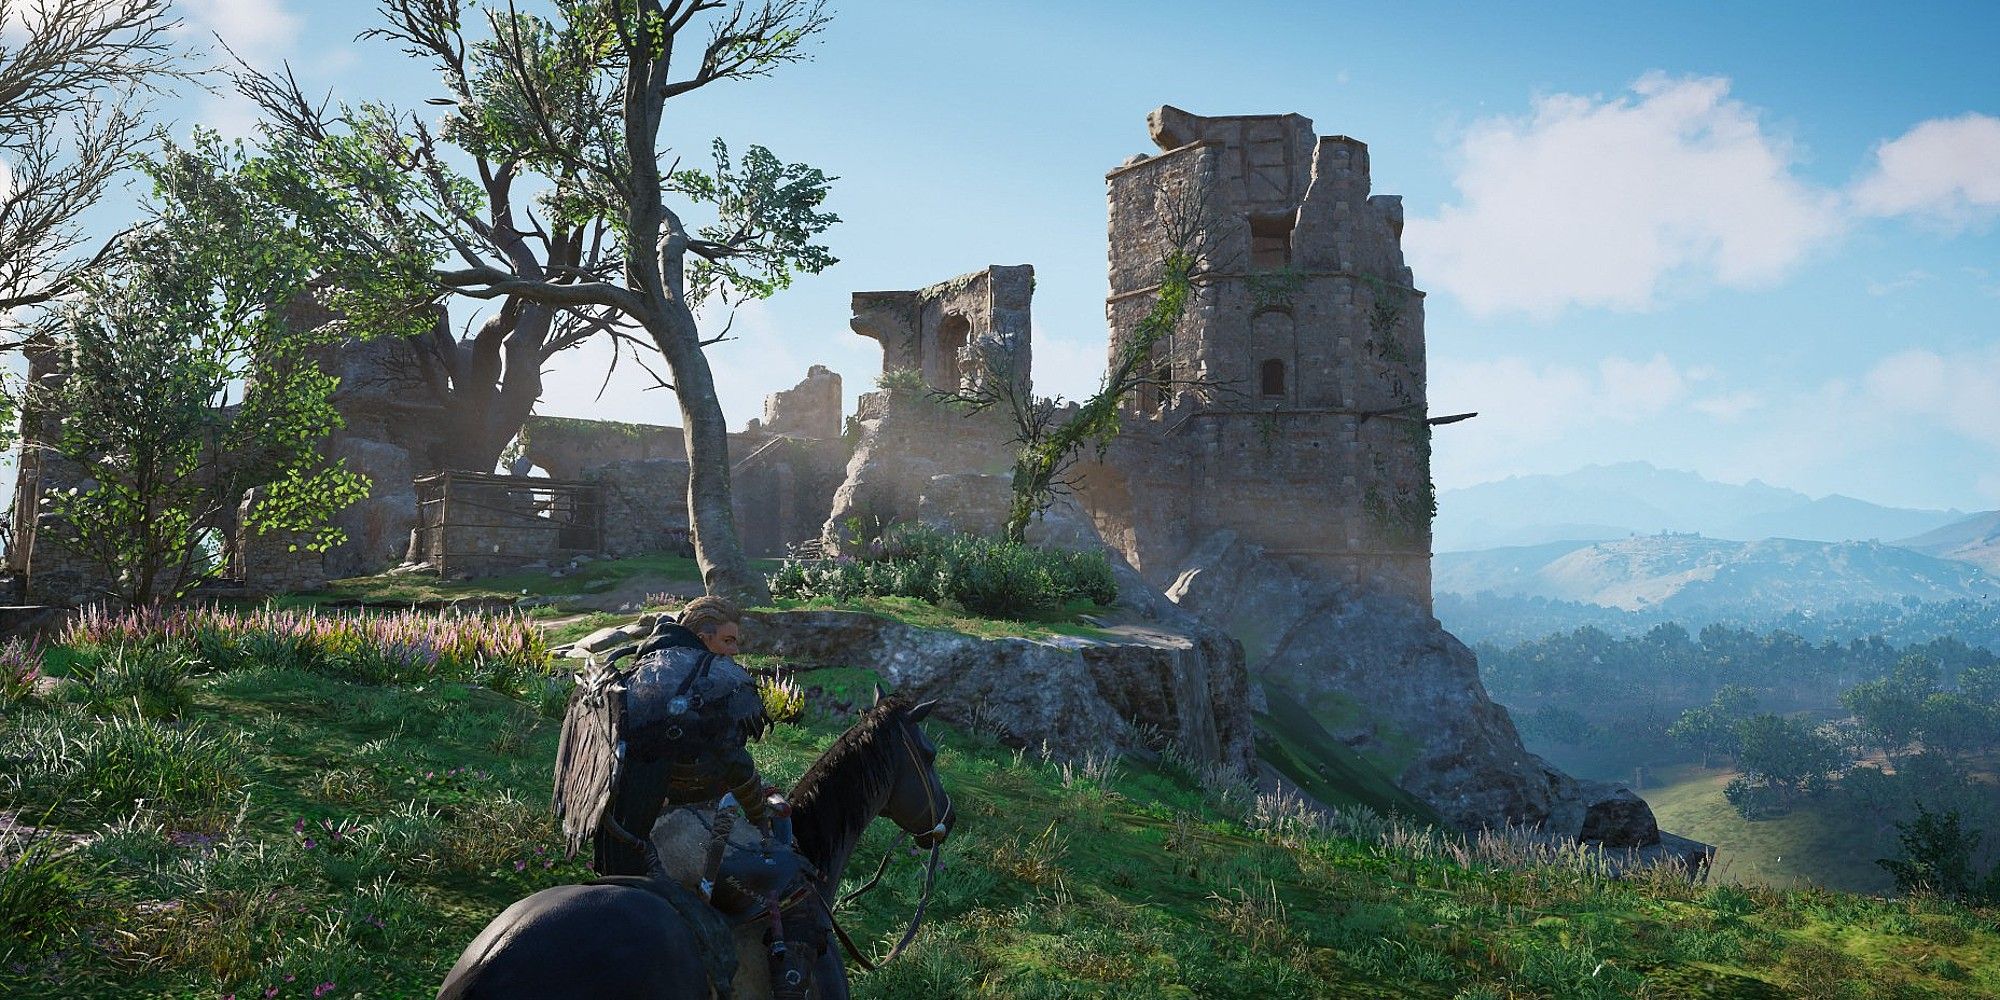 Eivor is on horseback, outside the ruins of a castle on a hill